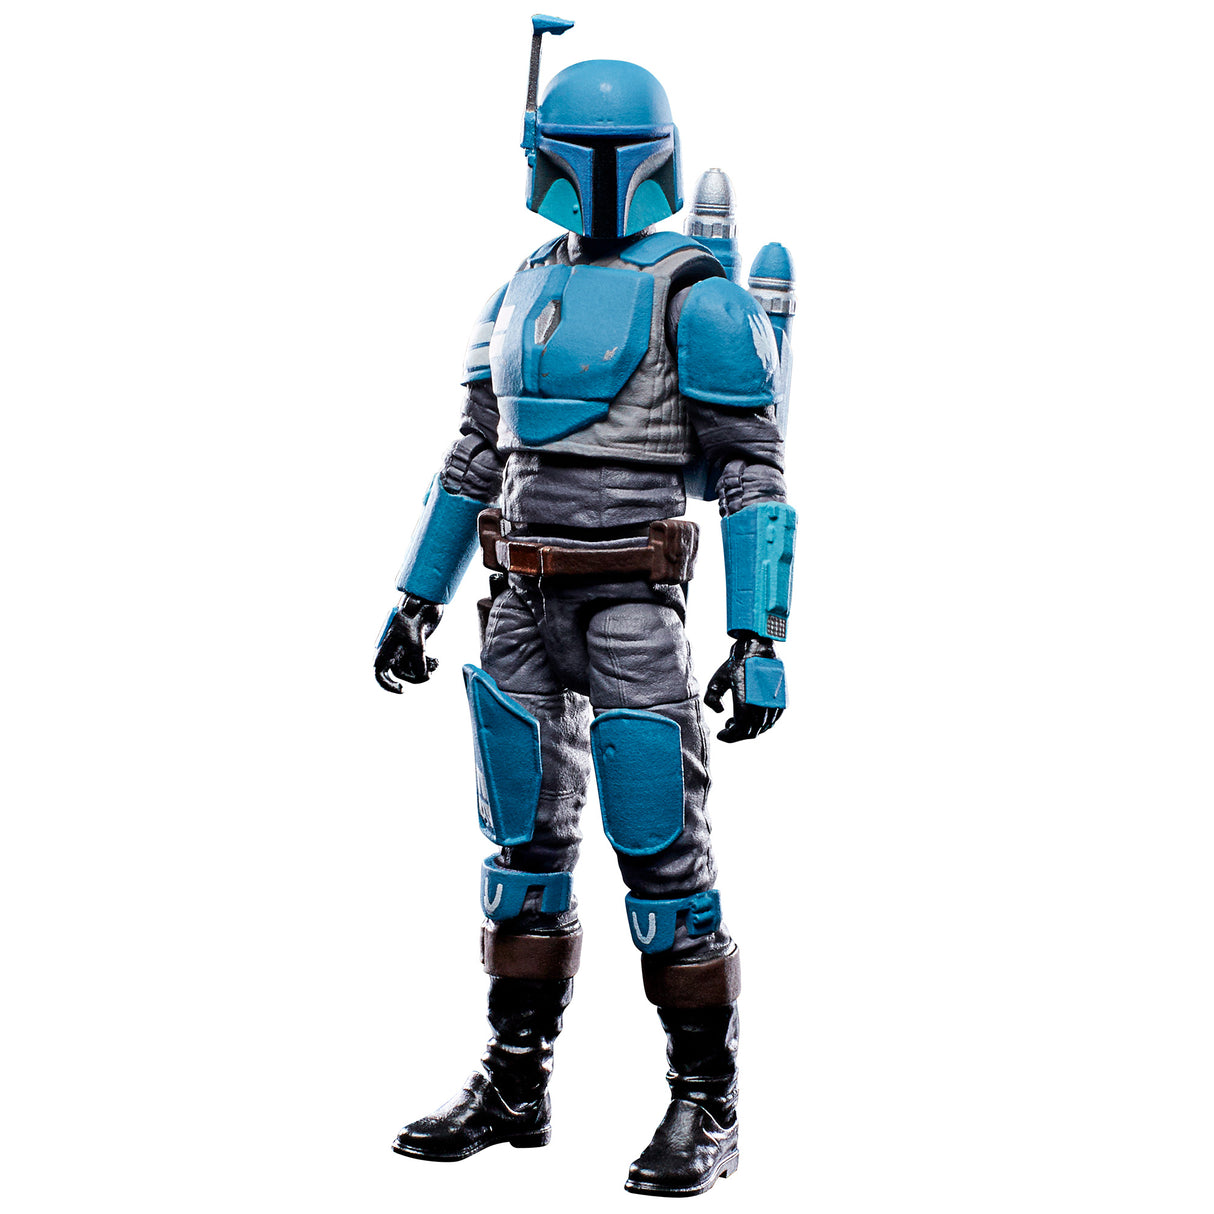 Star Wars The Vintage Collection - DW Mandalorian Action Figure (3.75-inch)